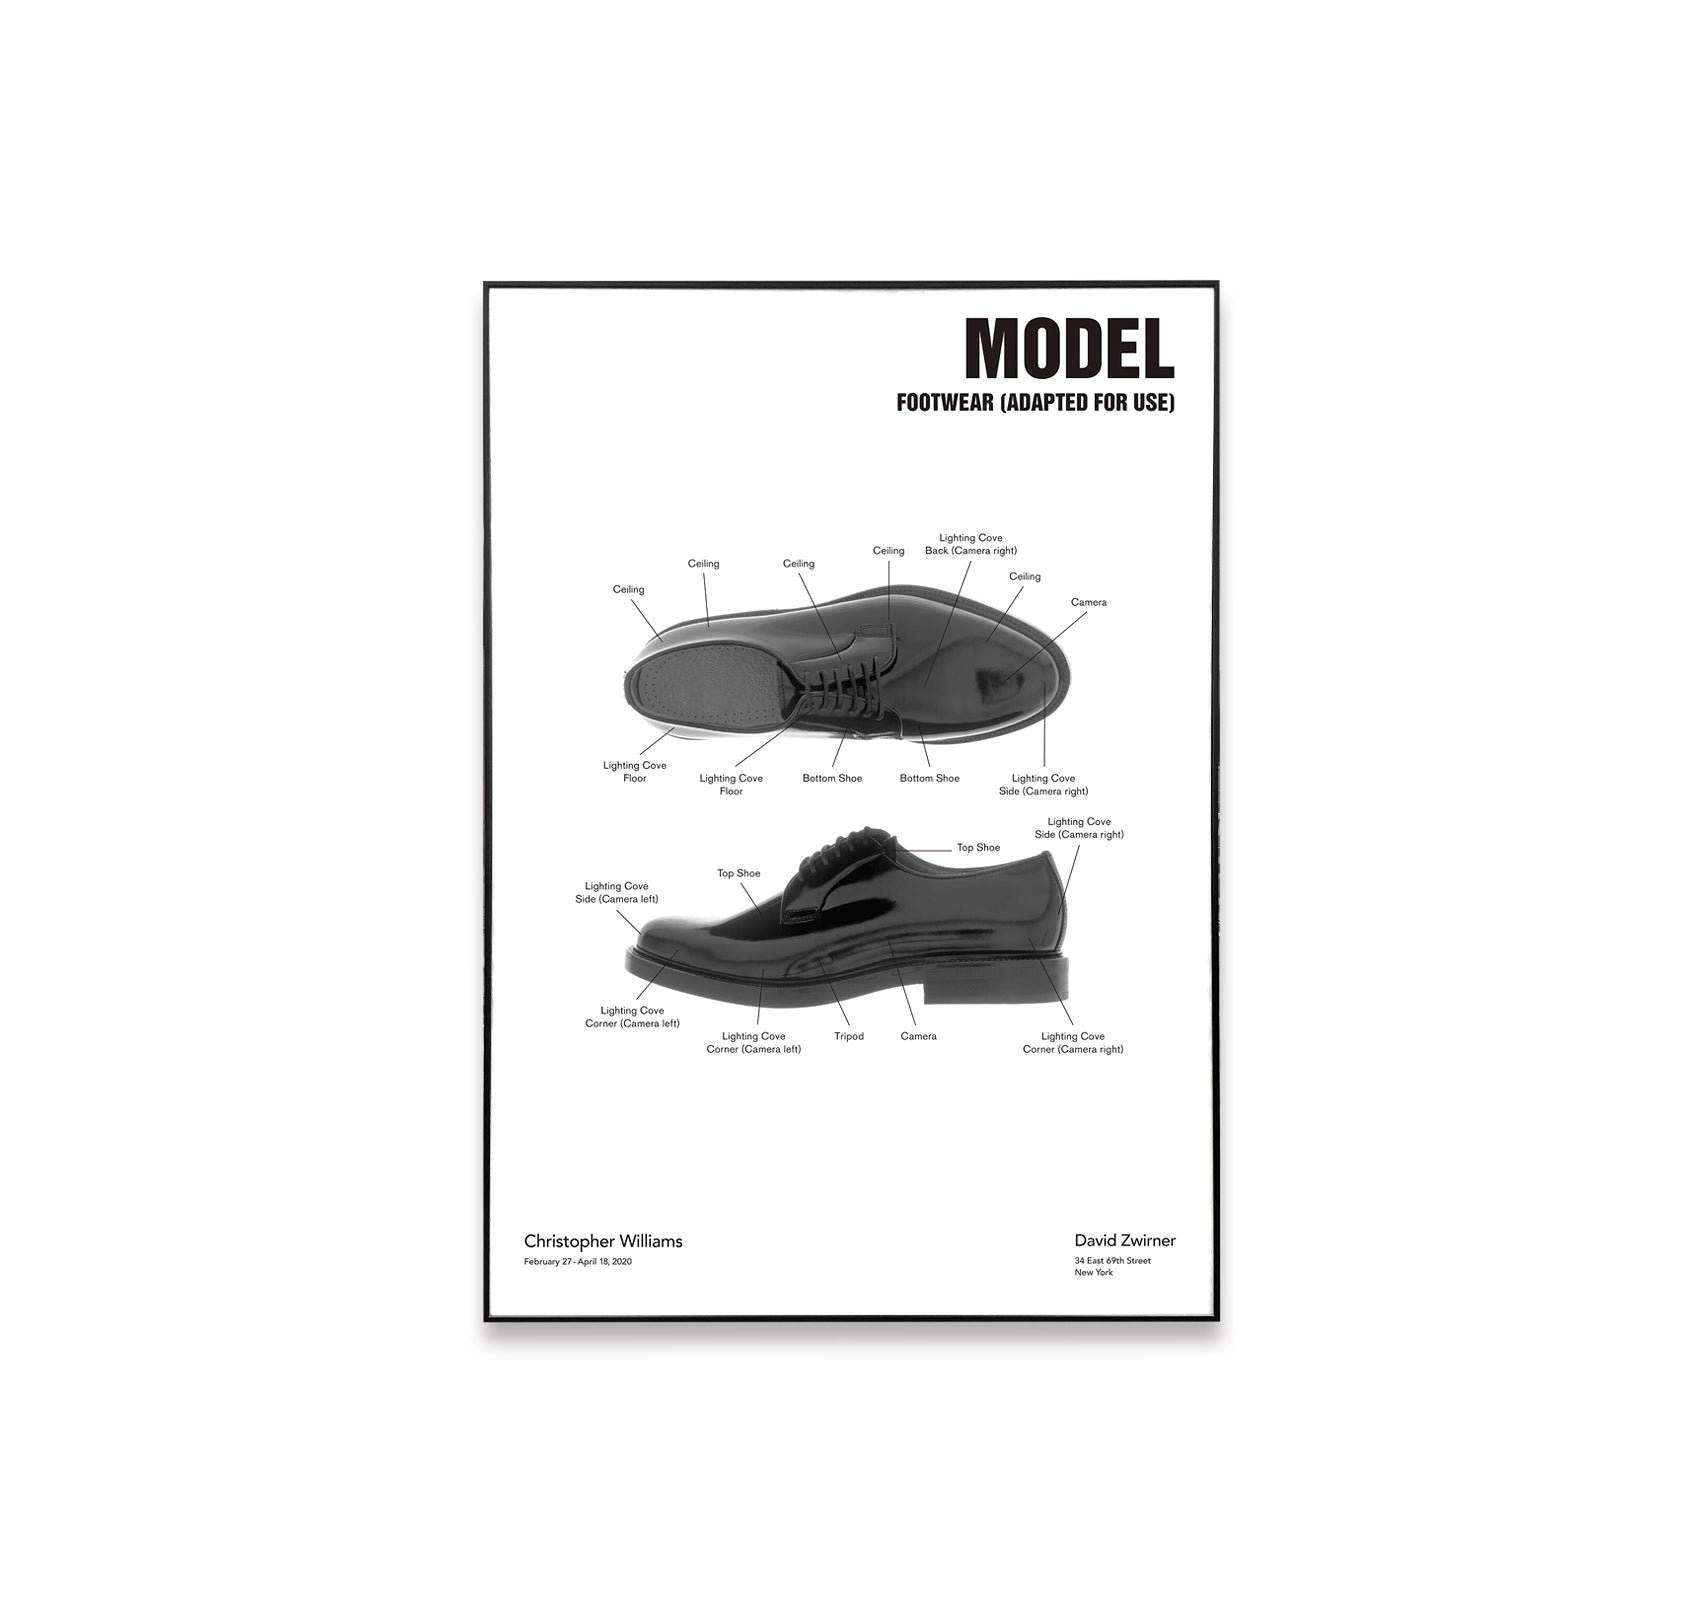 MODEL FOOTWEAR (ADAPTED FOR USE) POSTER by Christopher Williams